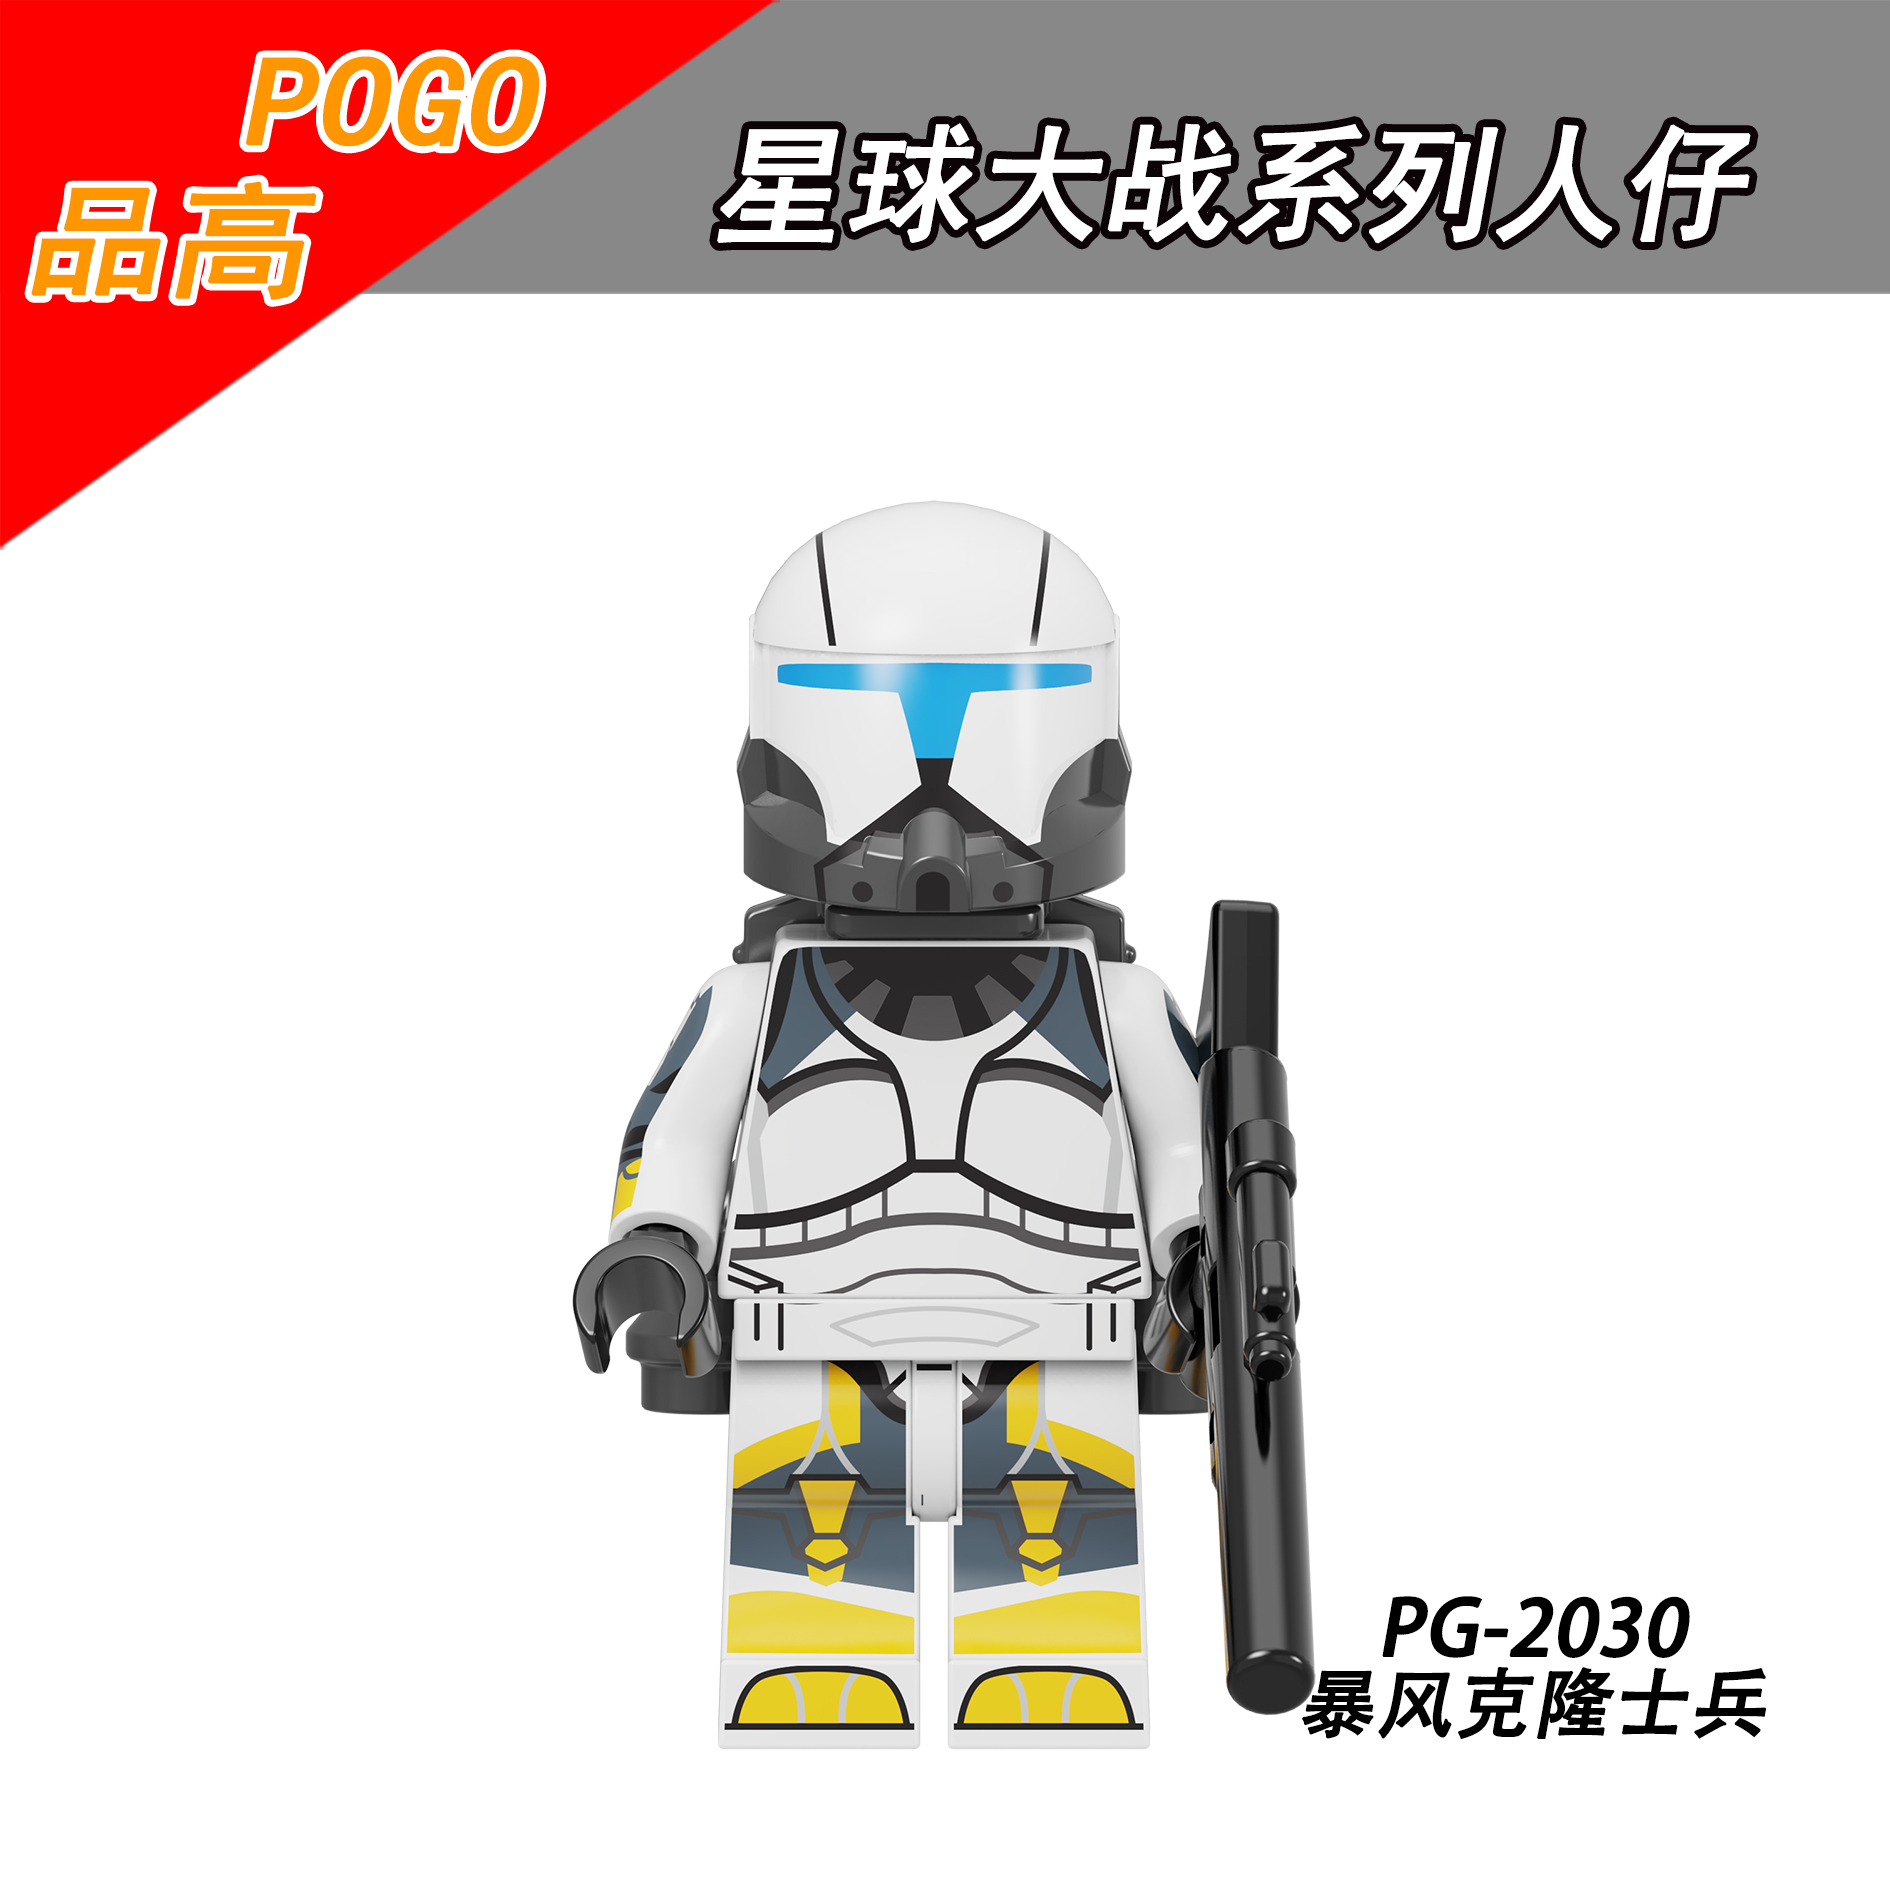 PG8295 PG2025 PG2026 PG2027 PG2028 PG2029 PG2030 PG2031 PG2032 Star War Movie Series Building Blocks Action Figures Educational Toys For Kids Gifts